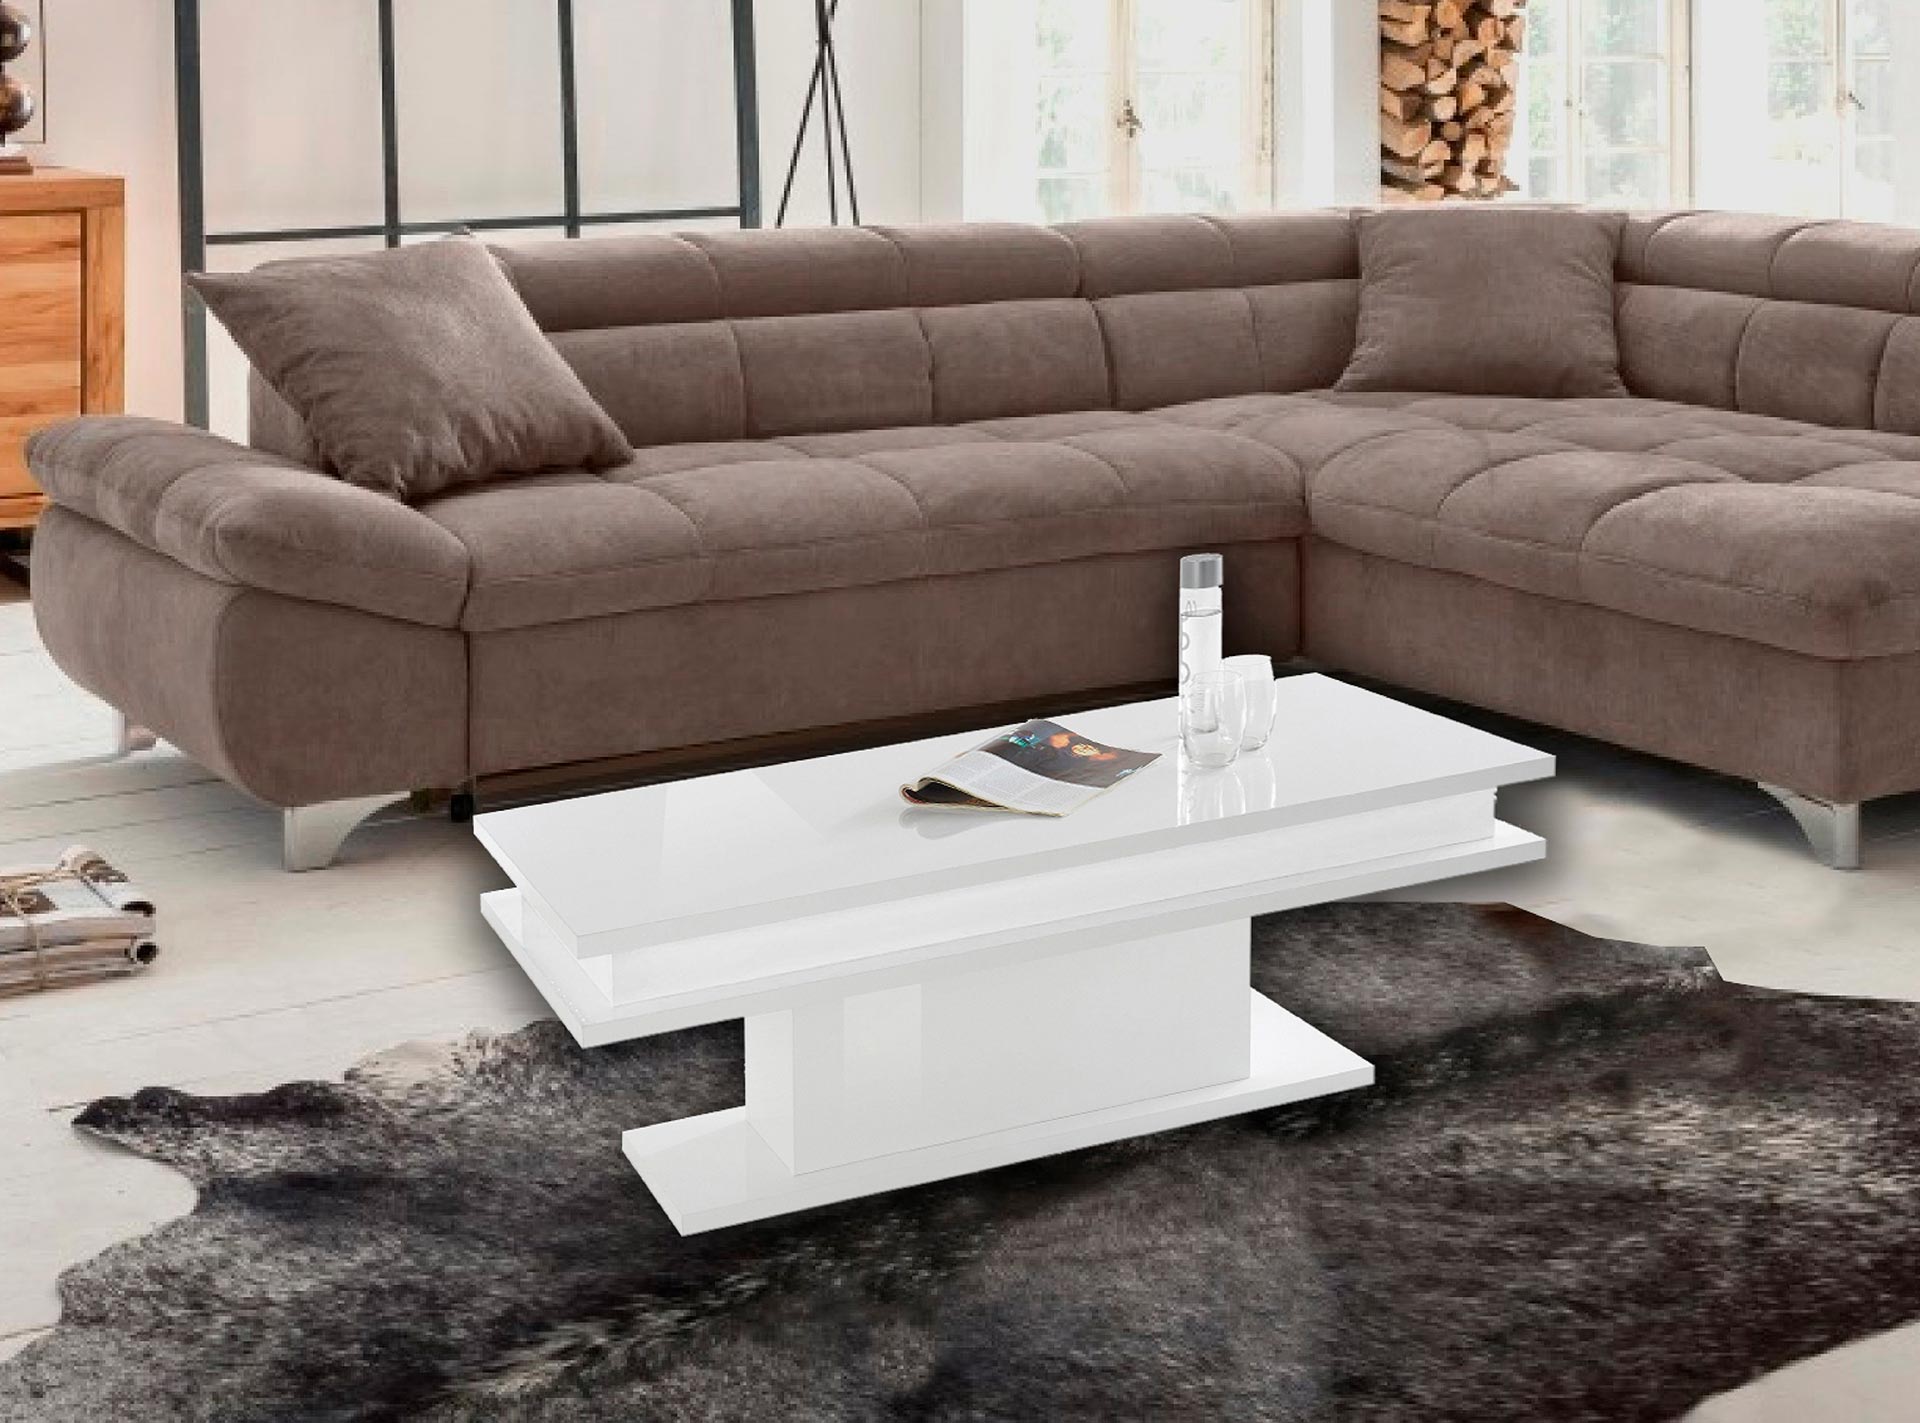 Web Furniture collections - Web Furniture